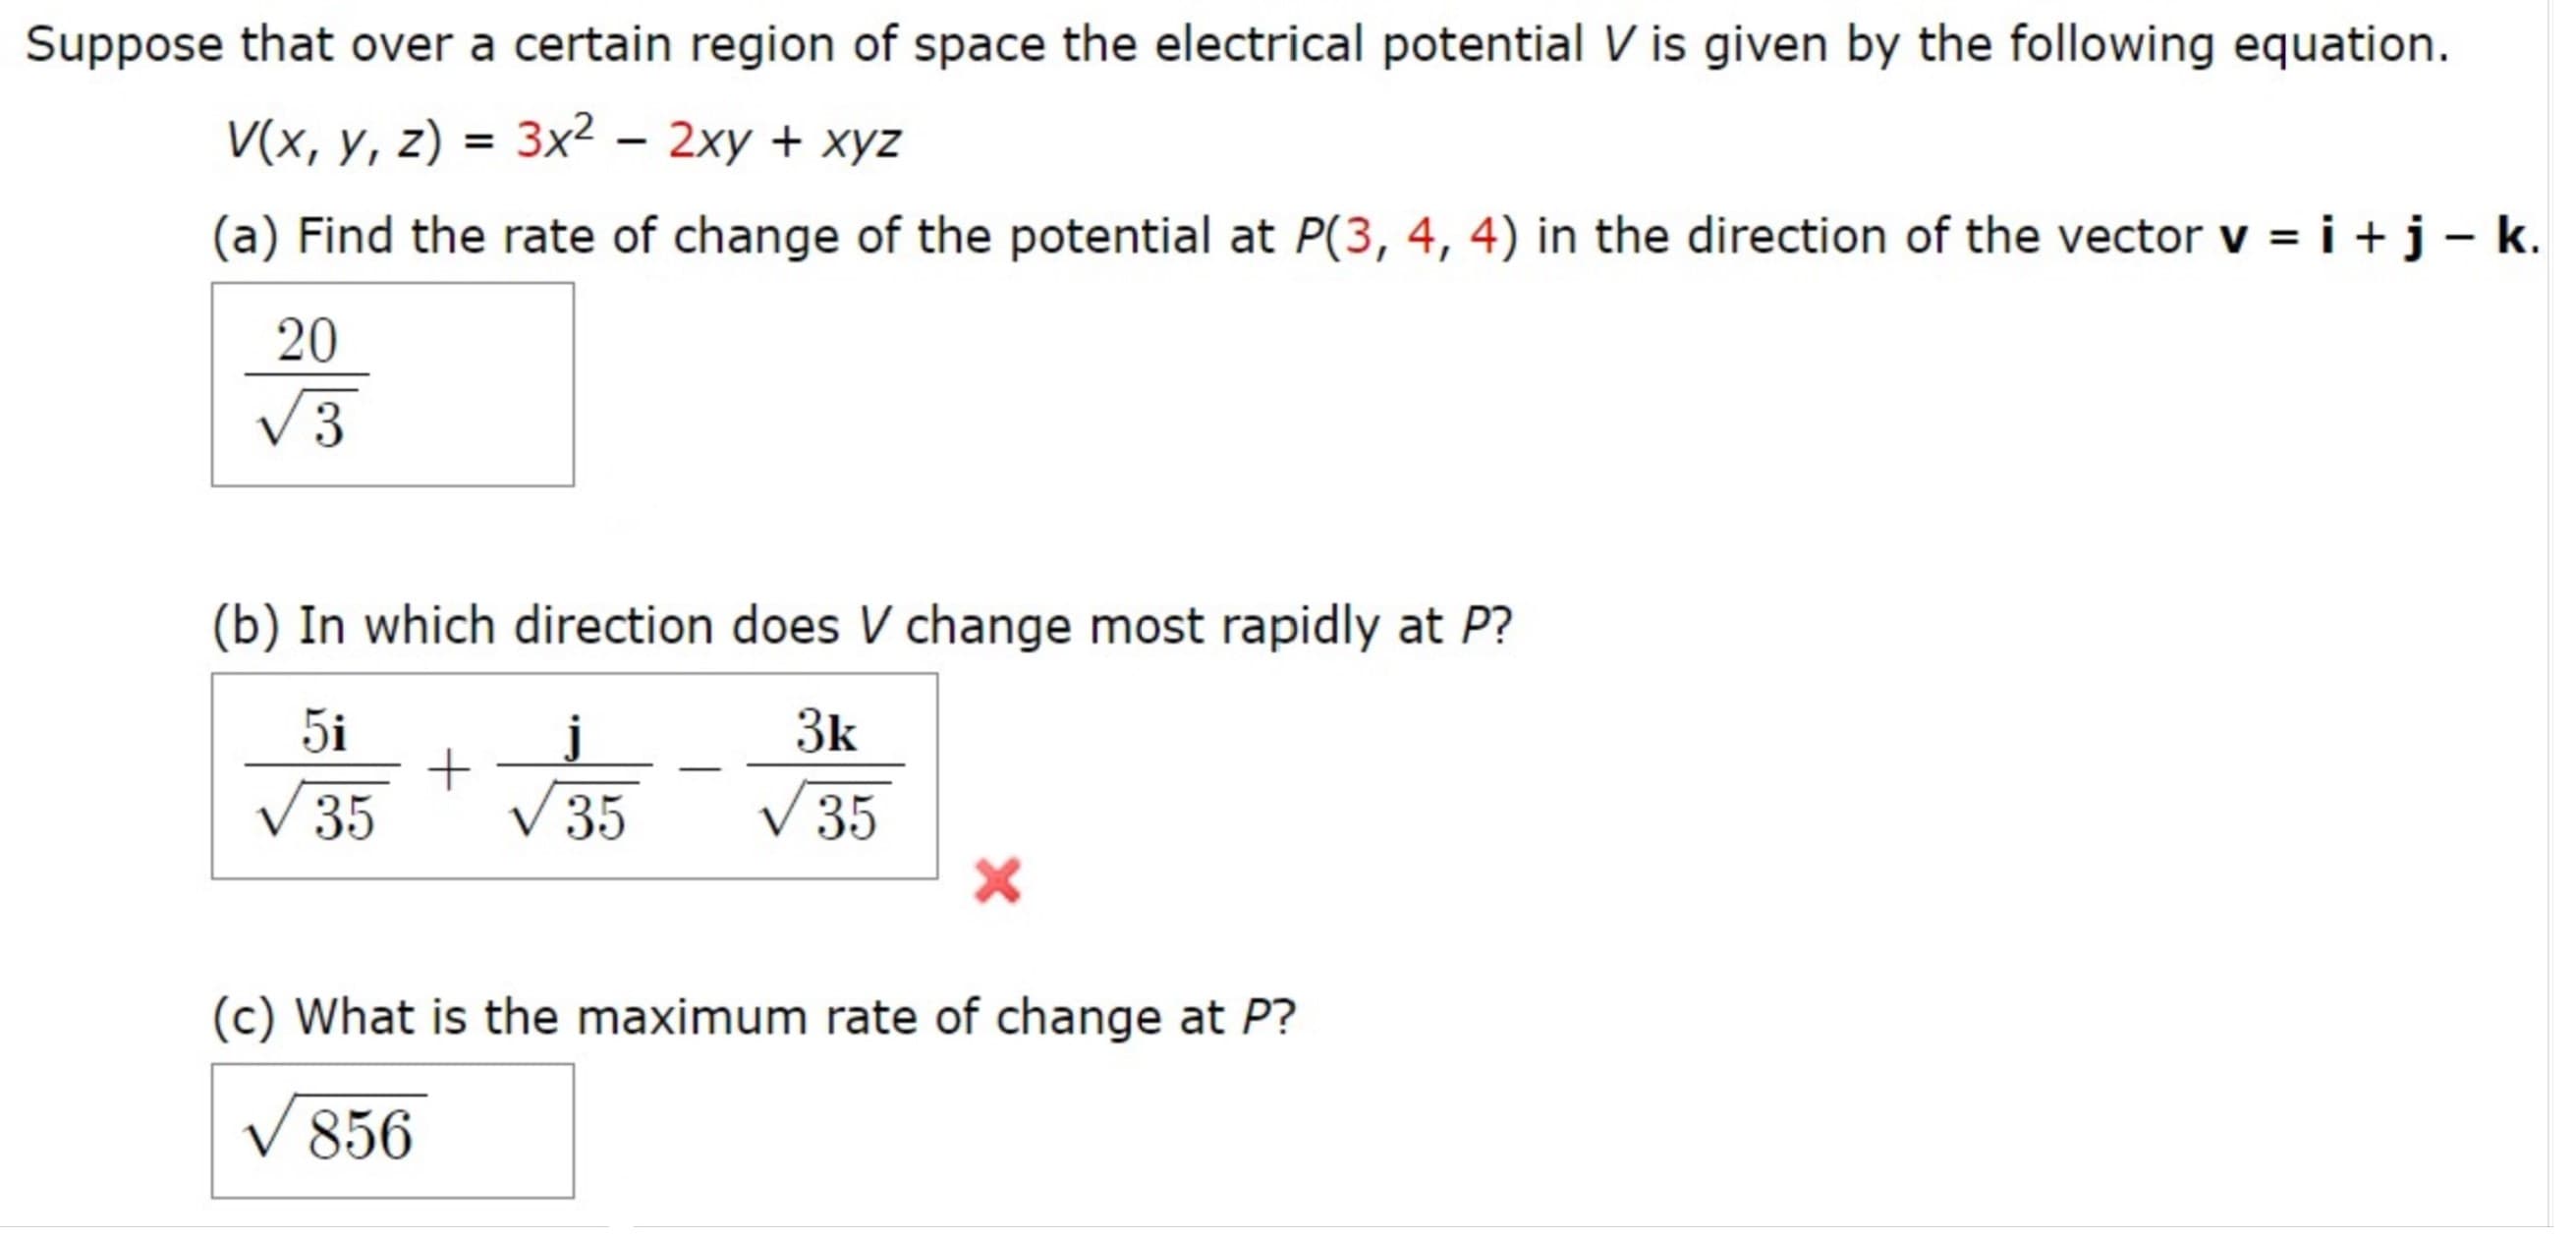 Suppose that over a certain region of space the electrical potential V is given by the following equation.
V(x, y, z) = 3x2 – 2xy + xyz
(a) Find the rate of change of the potential at P(3, 4, 4) in the direction of the vector v = i +j-k.
20
V3
(b) In which direction does V change most rapidly at P?
5i
3k
V 35
V 35
V 35
(c) What is the maximum rate of change at P?
V 856
